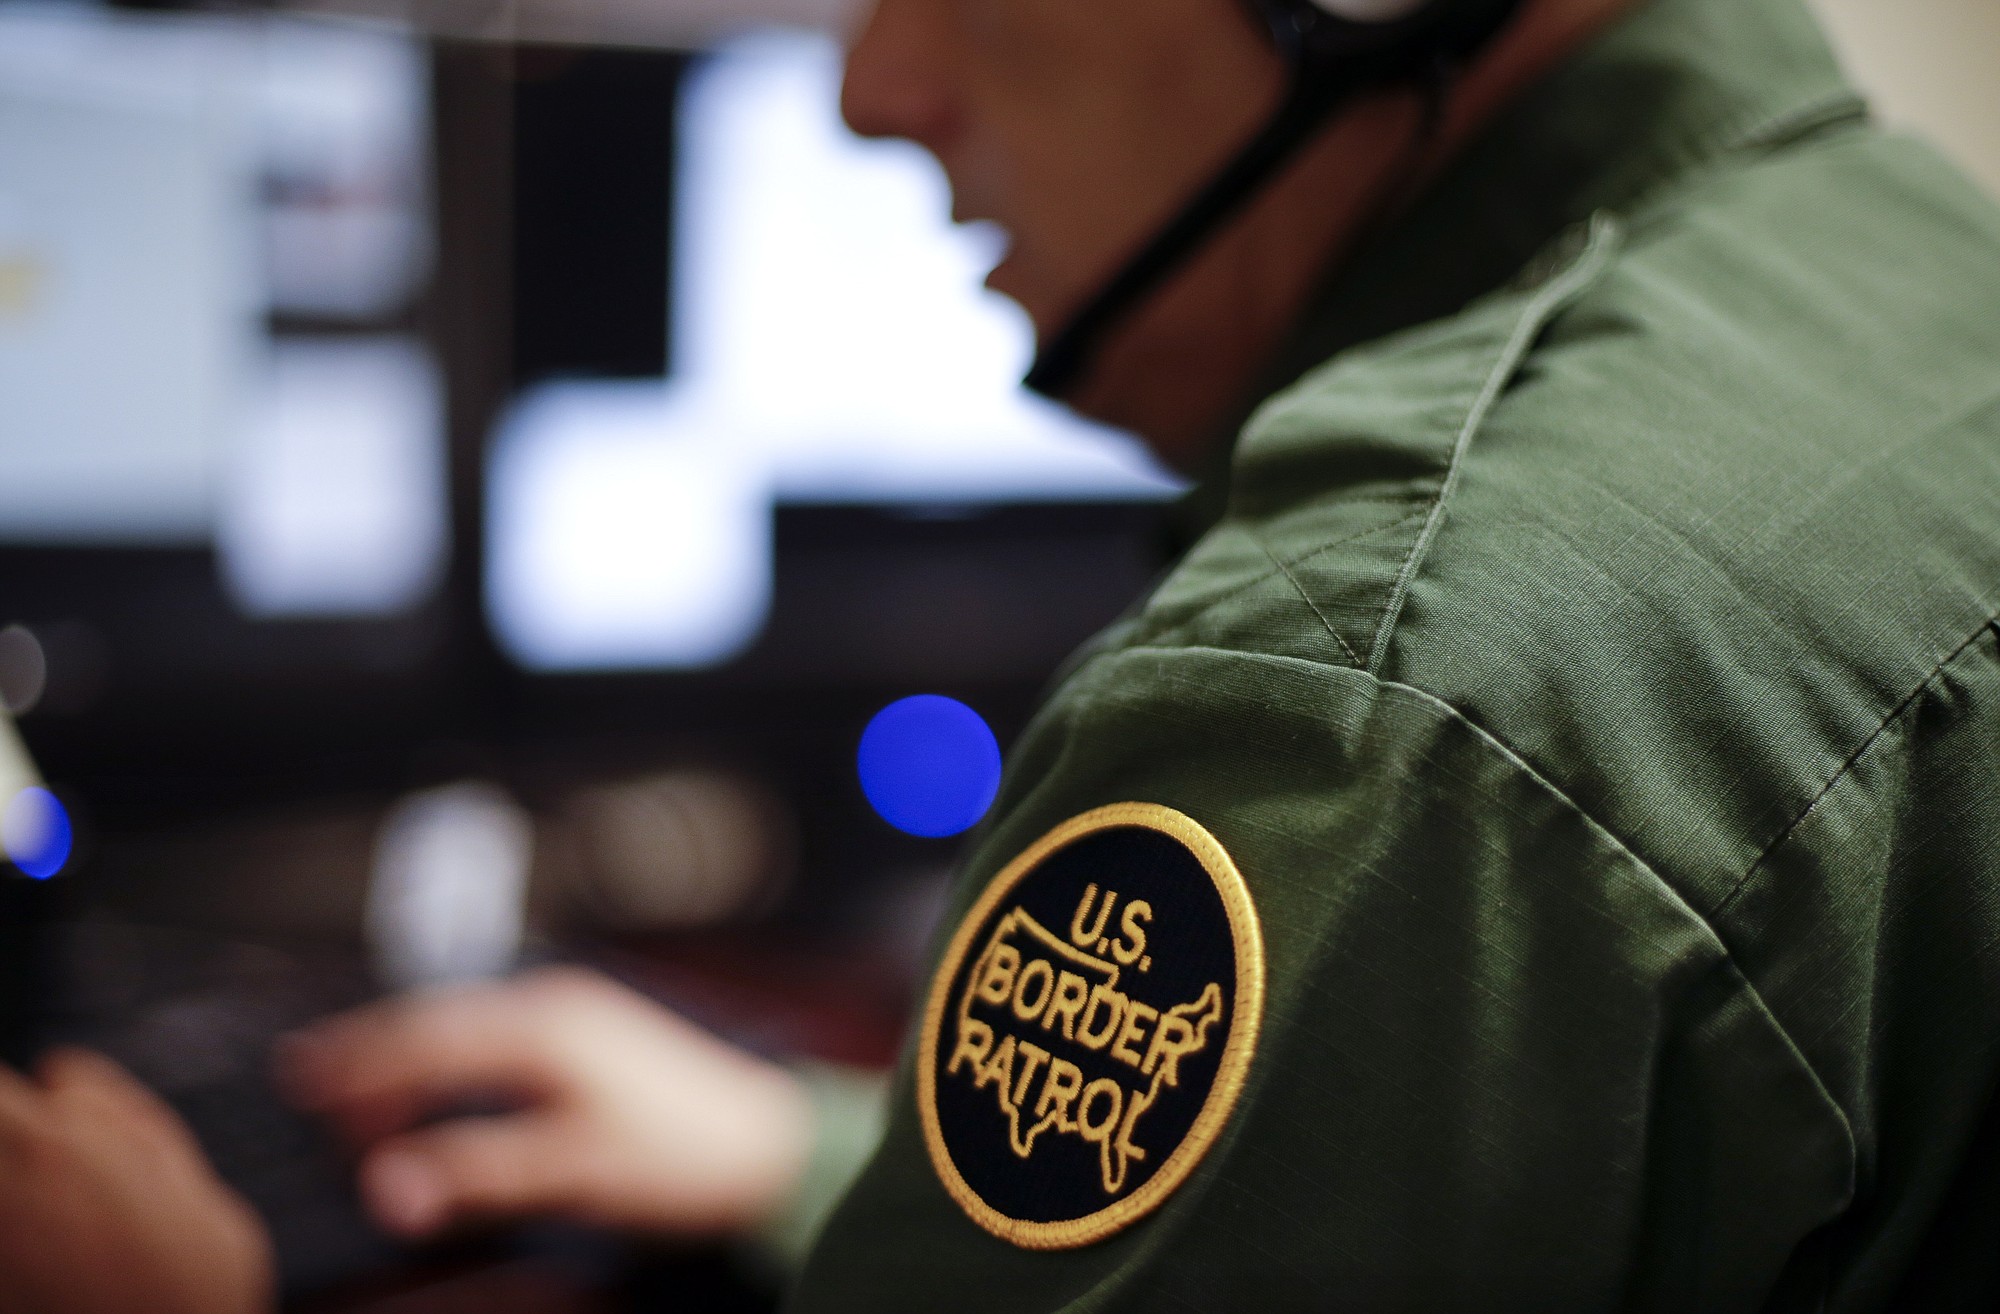 A Border Patrol agent uses a headset and computer June 5 at a facility in San Diego to conduct a long-distance interview by video with a person arrested crossing the border in Texas.